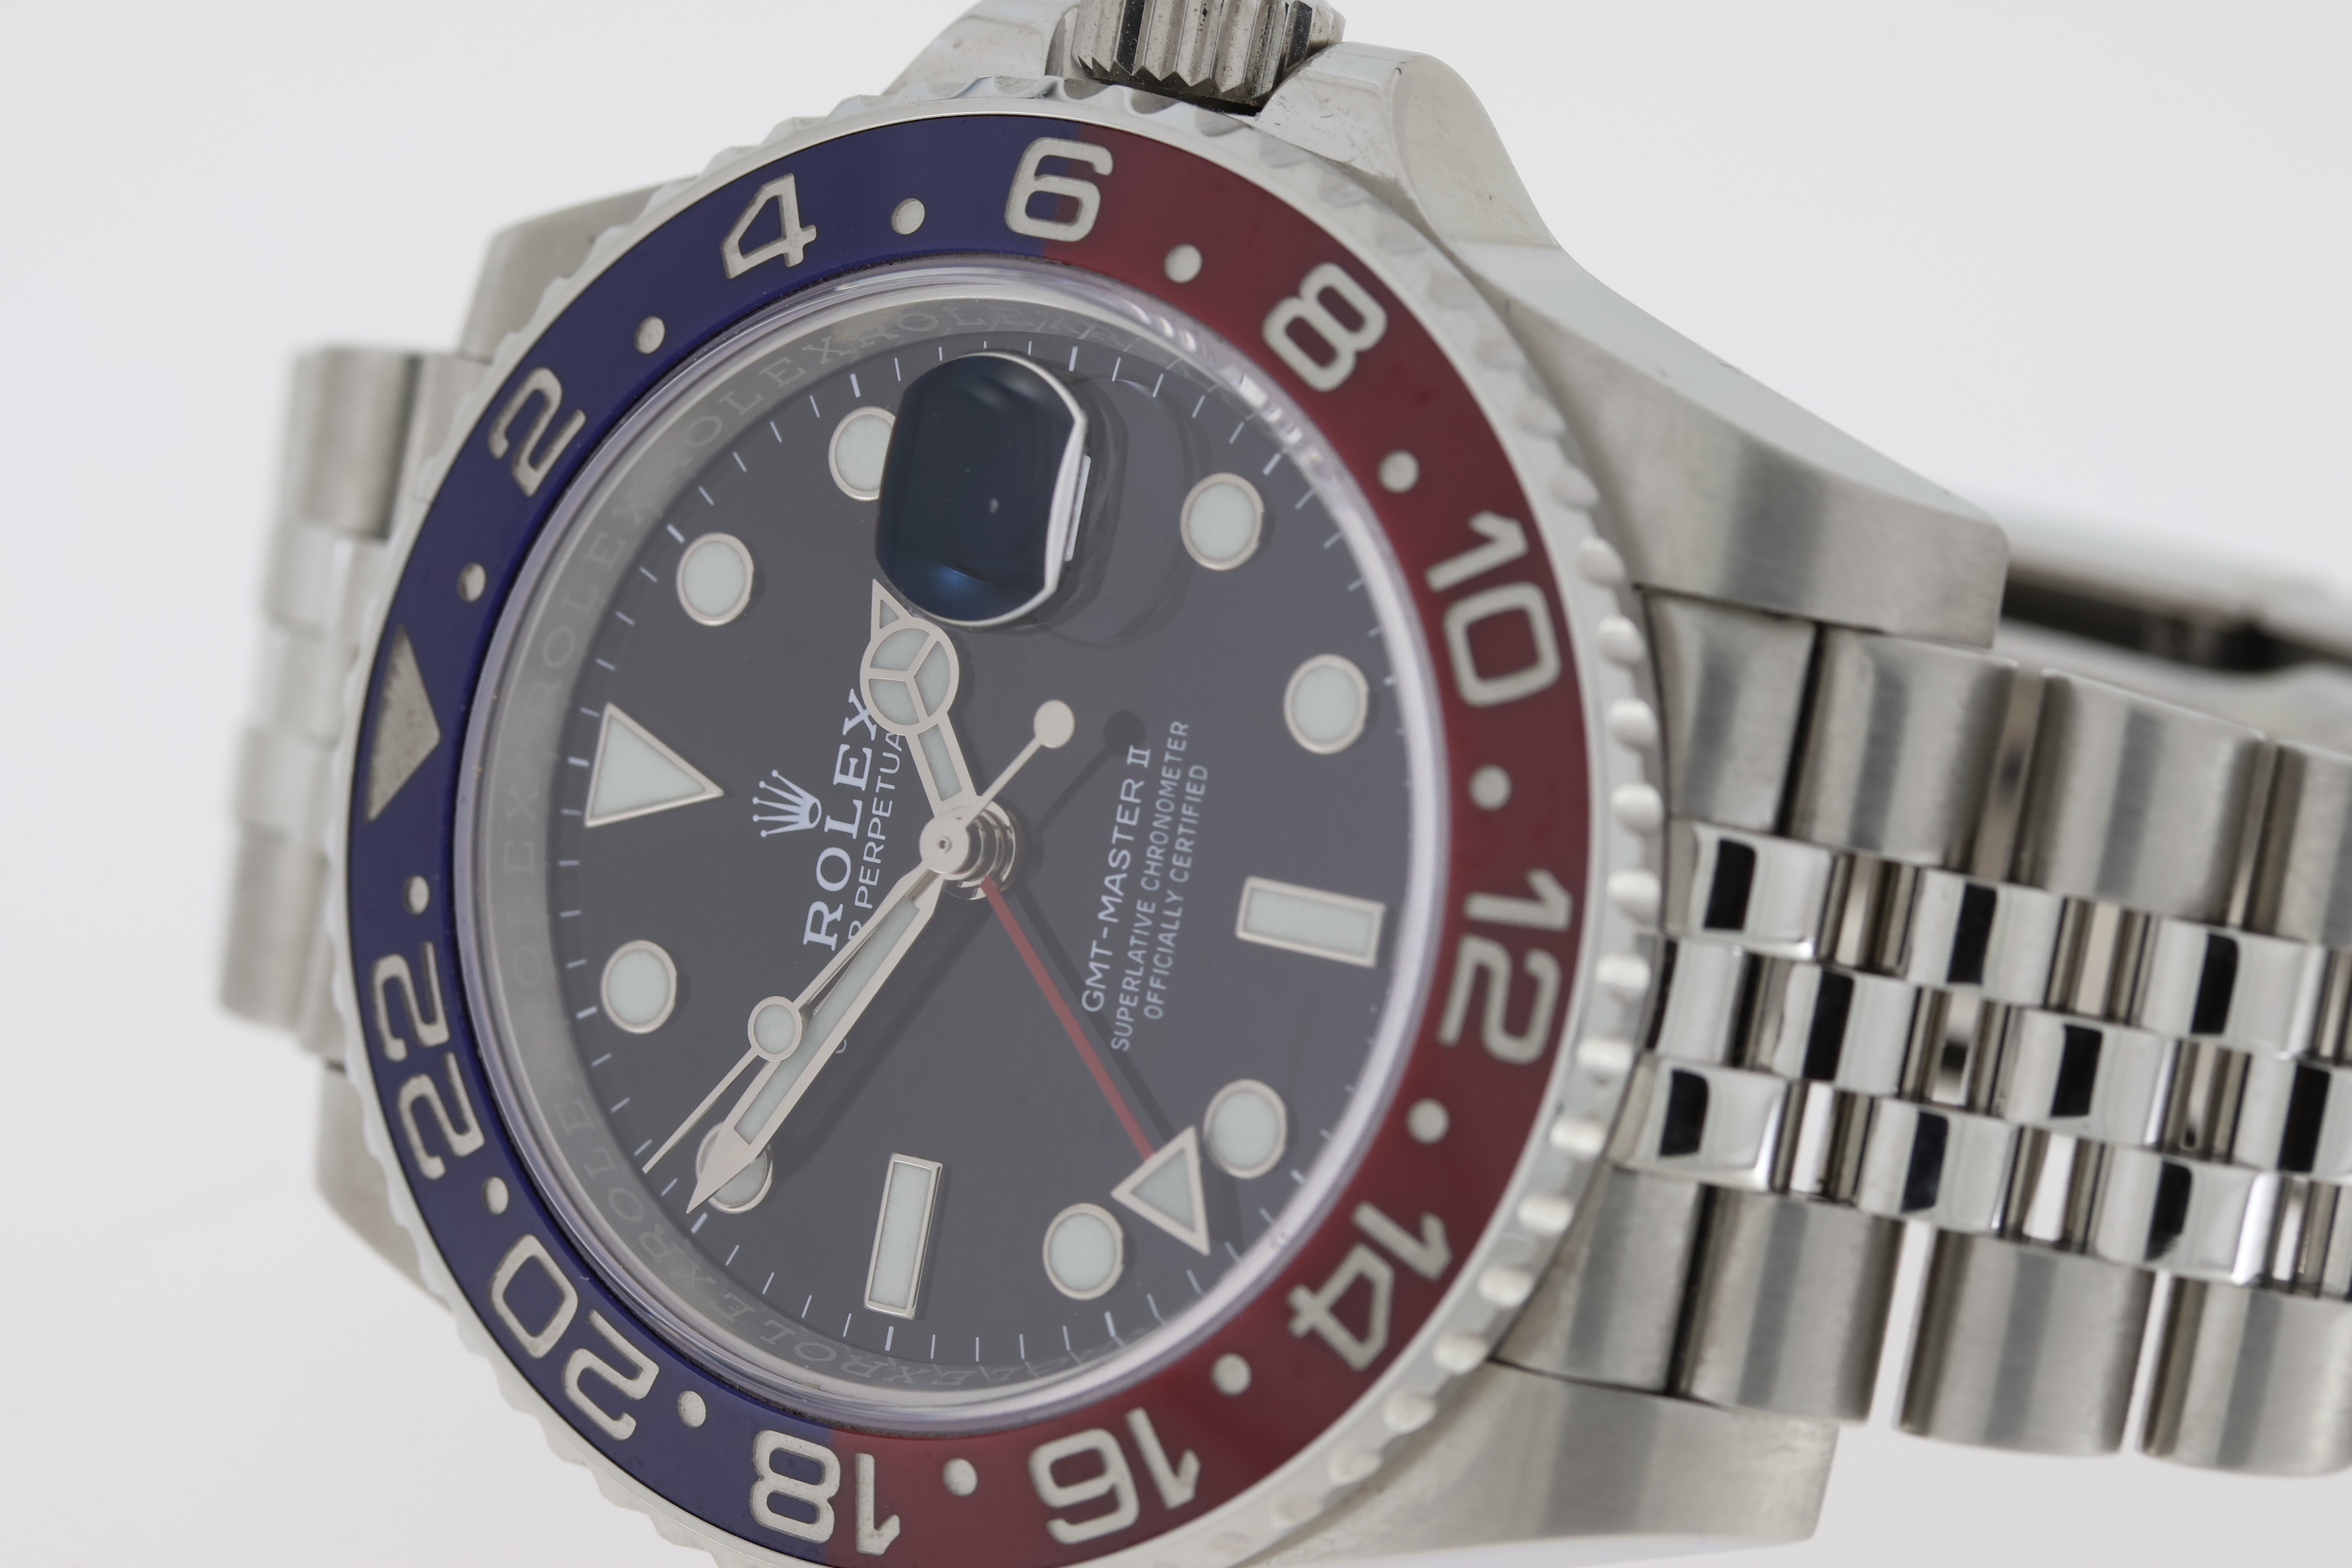 ROLEX GMT MASTER II 'PEPSI' REFERENCE 126710BLRO WITH PAPERS 2020 - Image 3 of 6